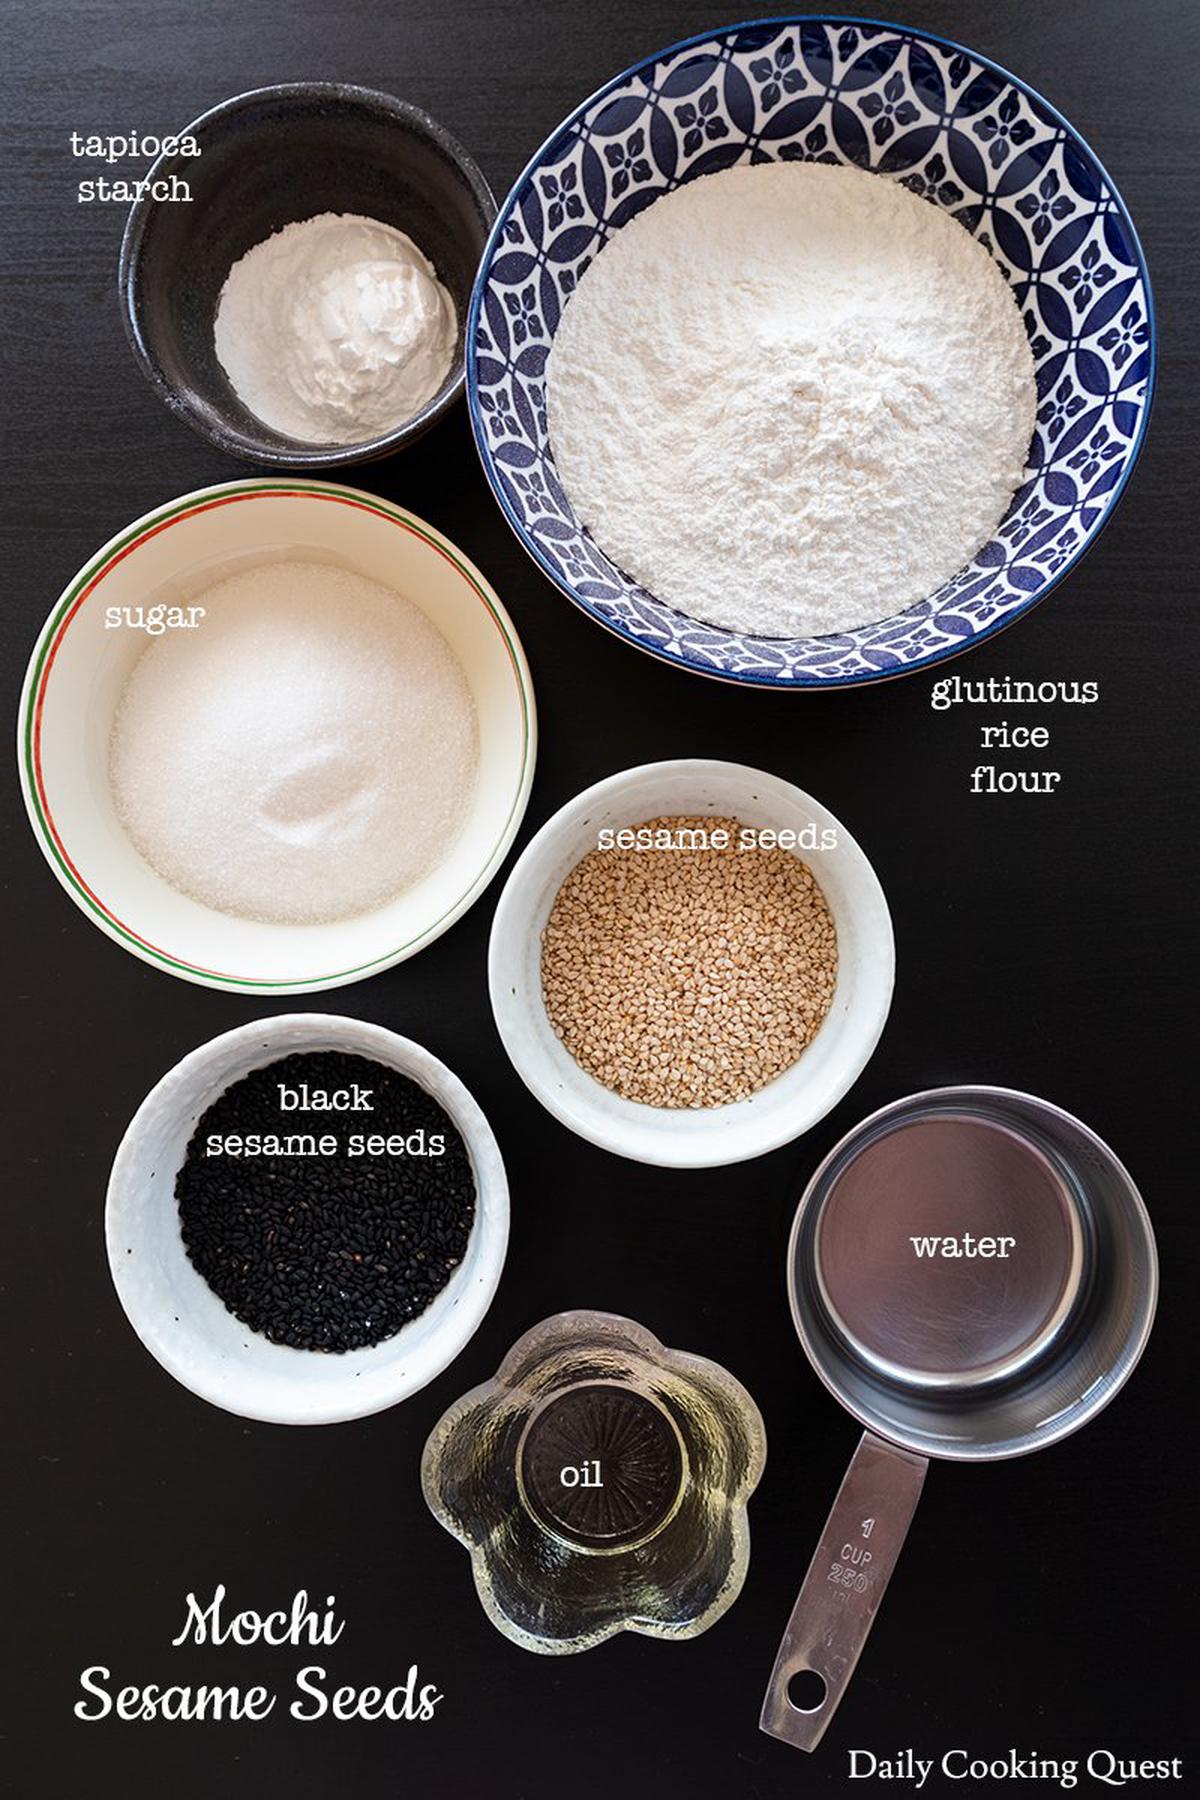 Ingredients for mochi sesame seeds: glutinous rice flour, tapioca starch, sugar, sesame seeds, water, and oil.